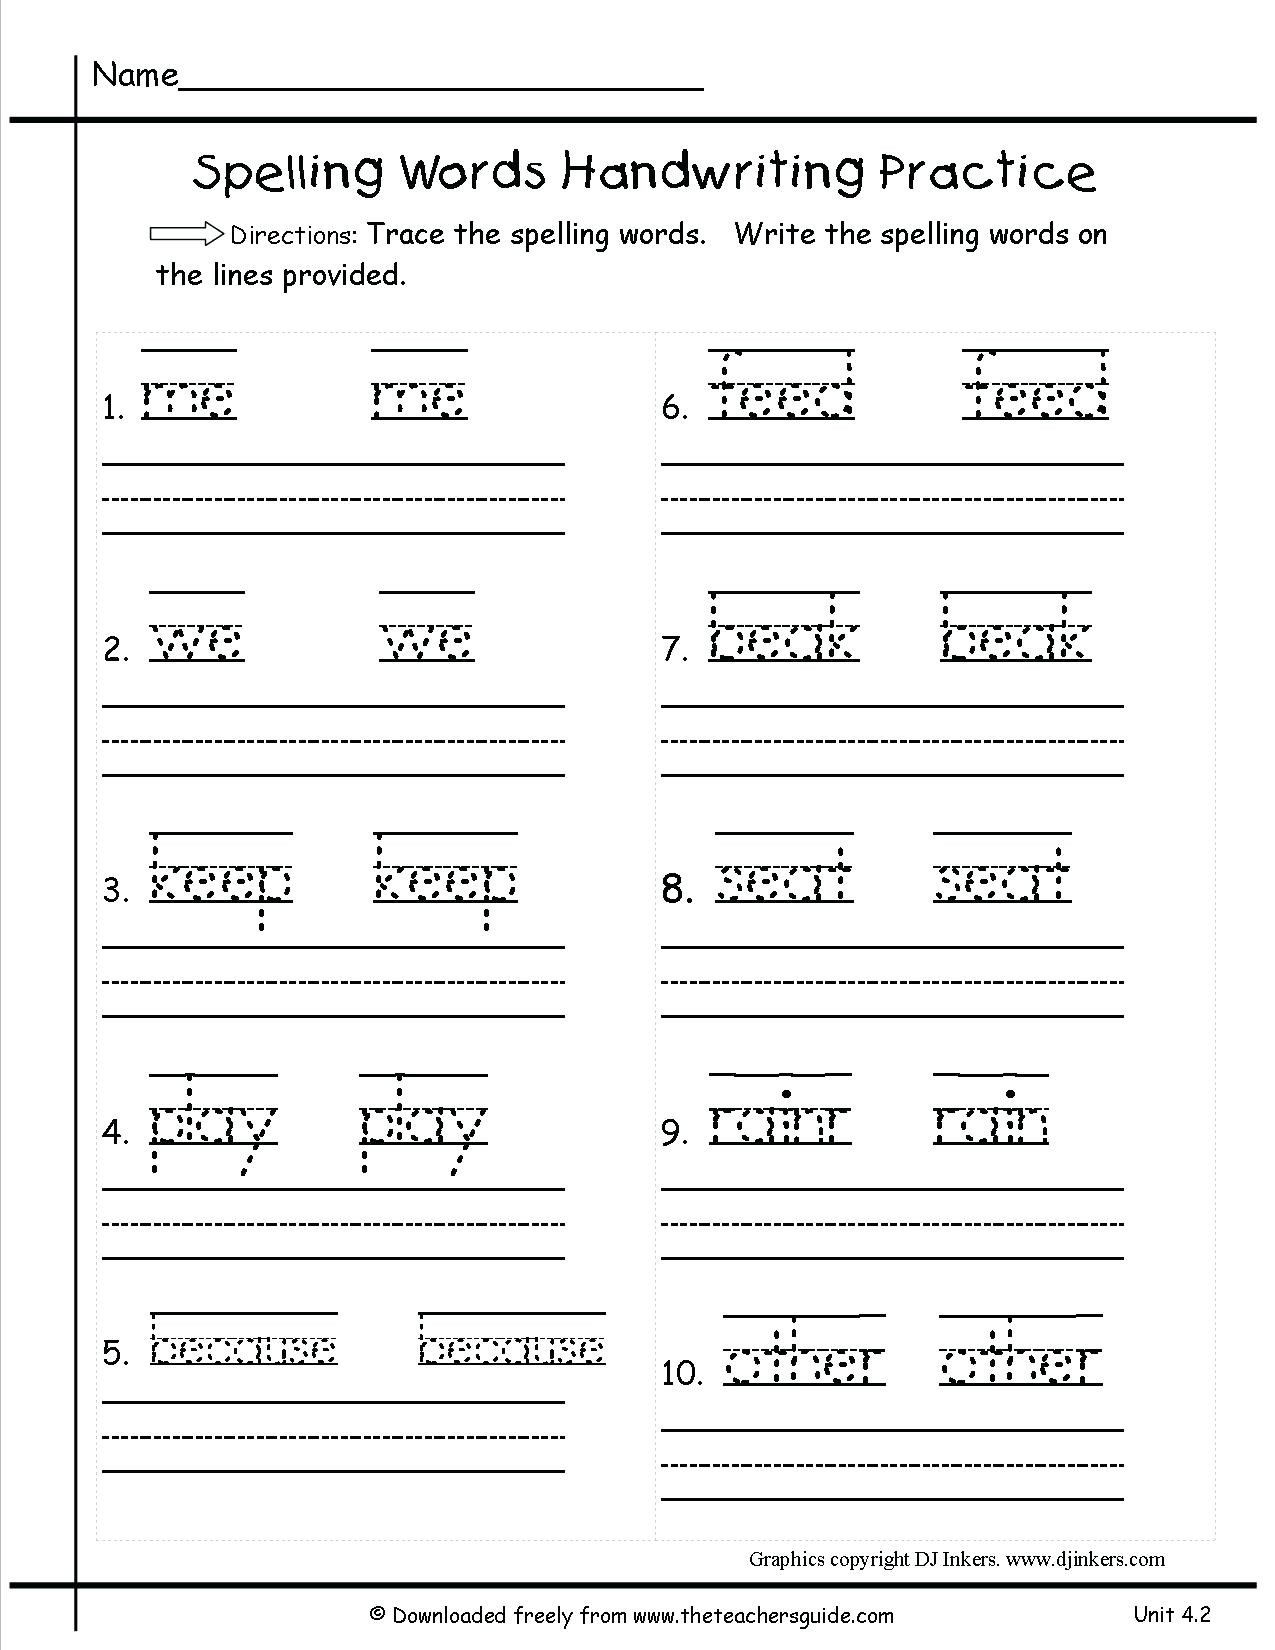 these-free-printables-spelling-worksheets-are-great-for-any-spelling